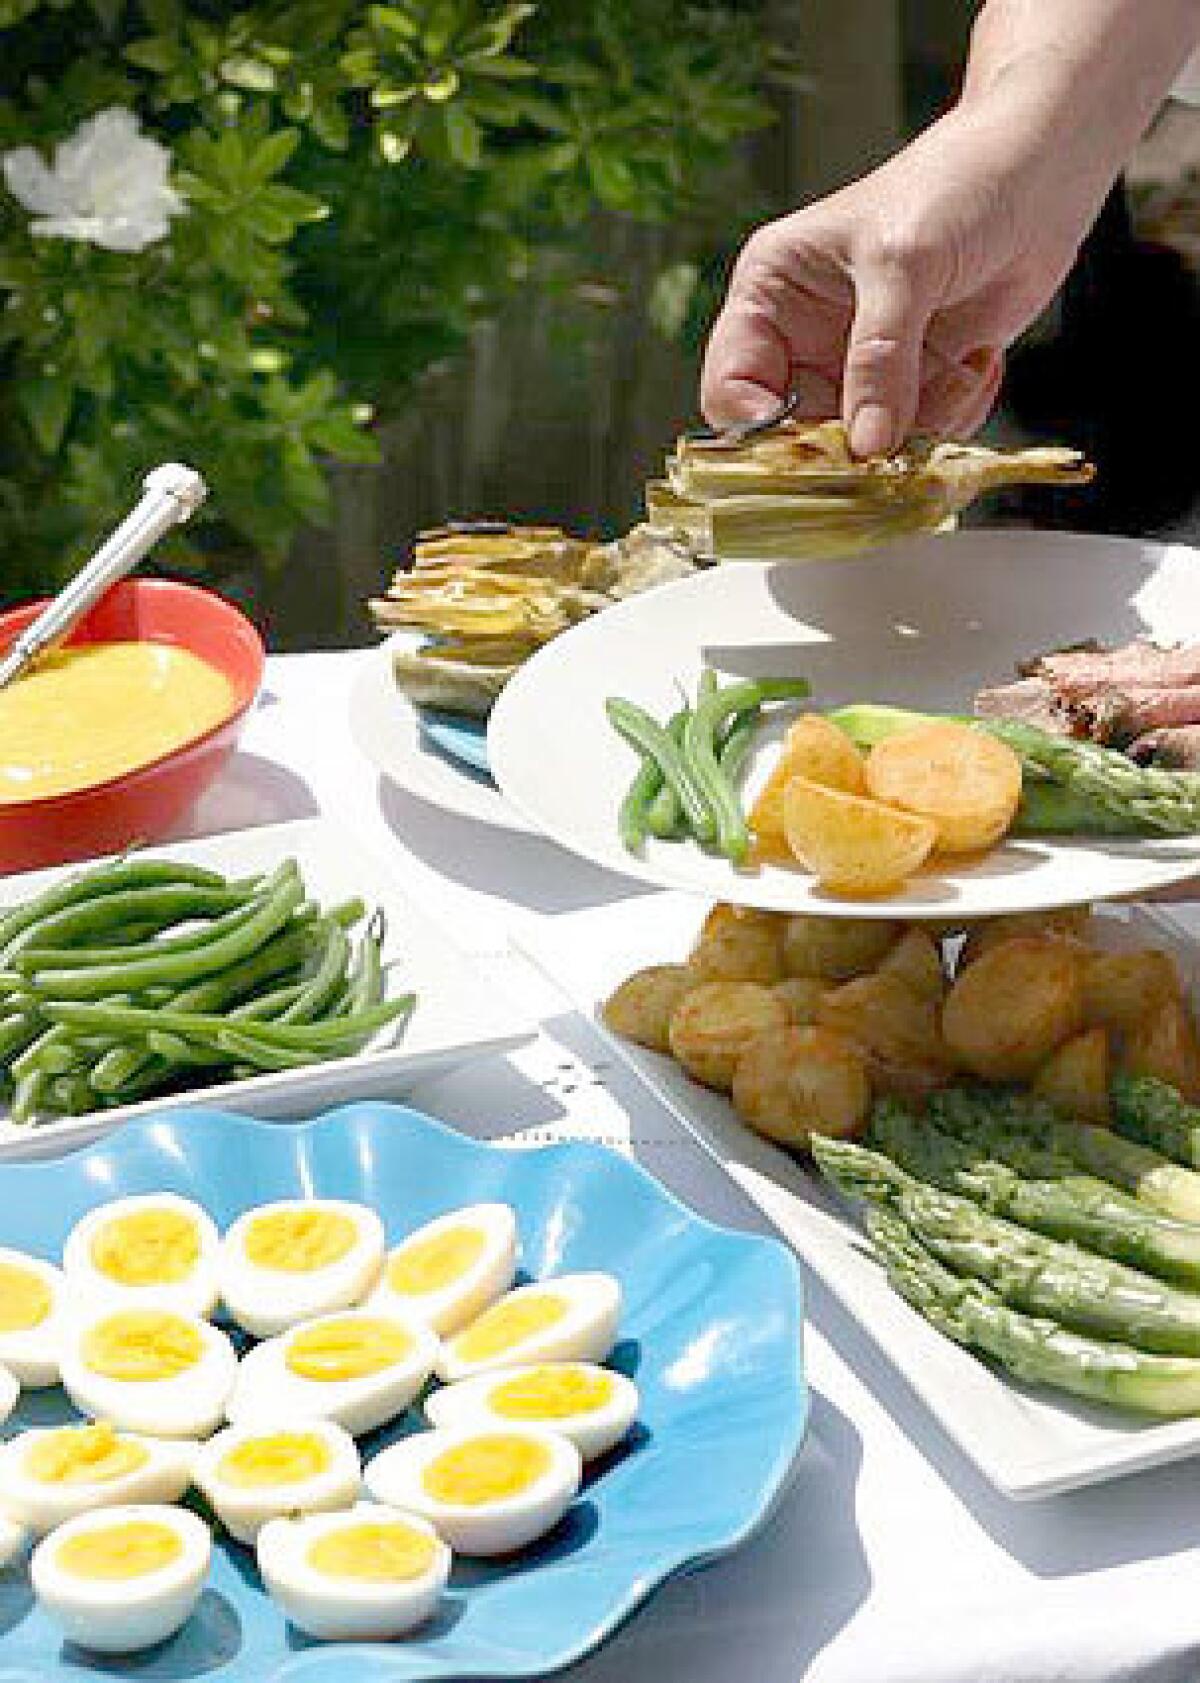 BIG FLAVOR: Aioli rocks with grilled artichokes, hard-boiled eggs, beans and asparagus.